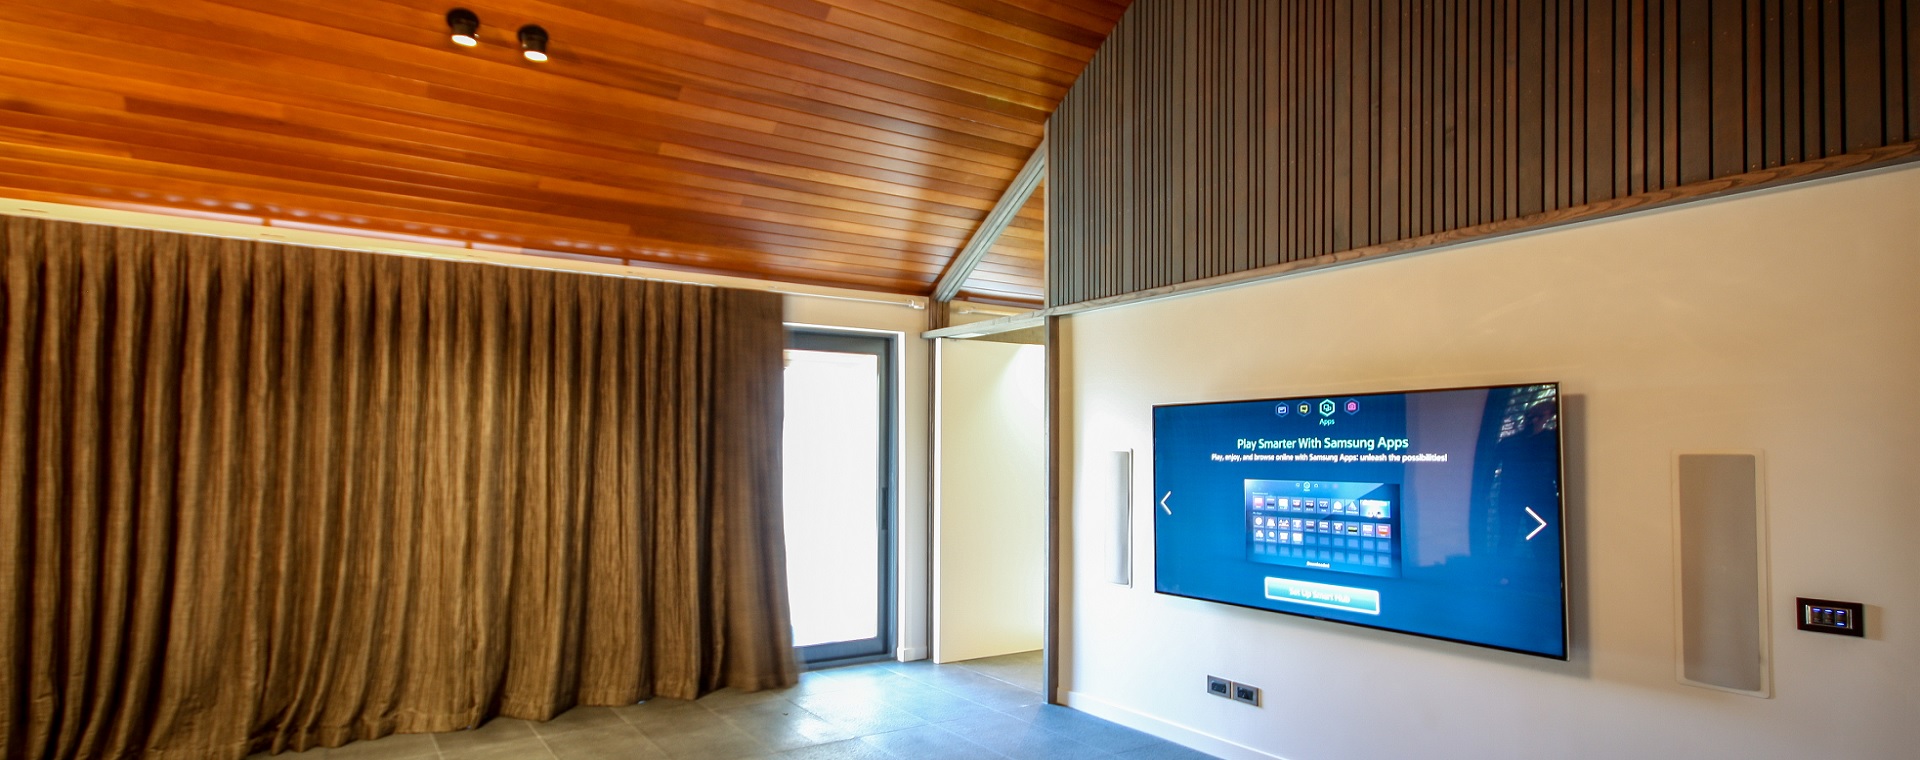 Entertainment room with large TV screen and in-wall speakers for a home theatre experience